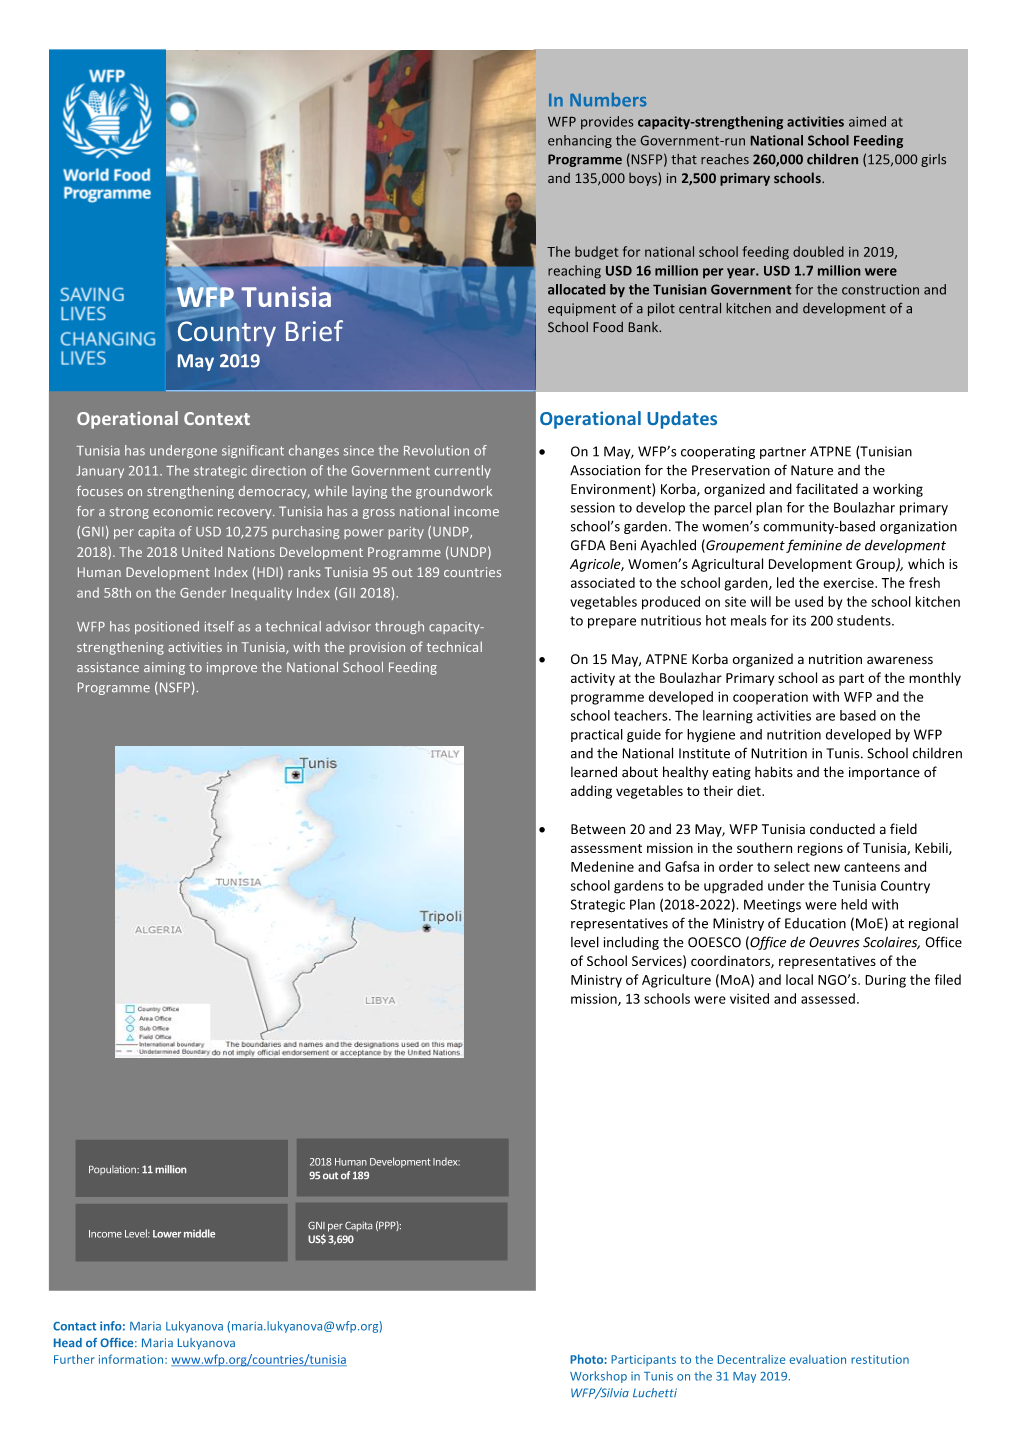 WFP Tunisia Country Brief May 2019